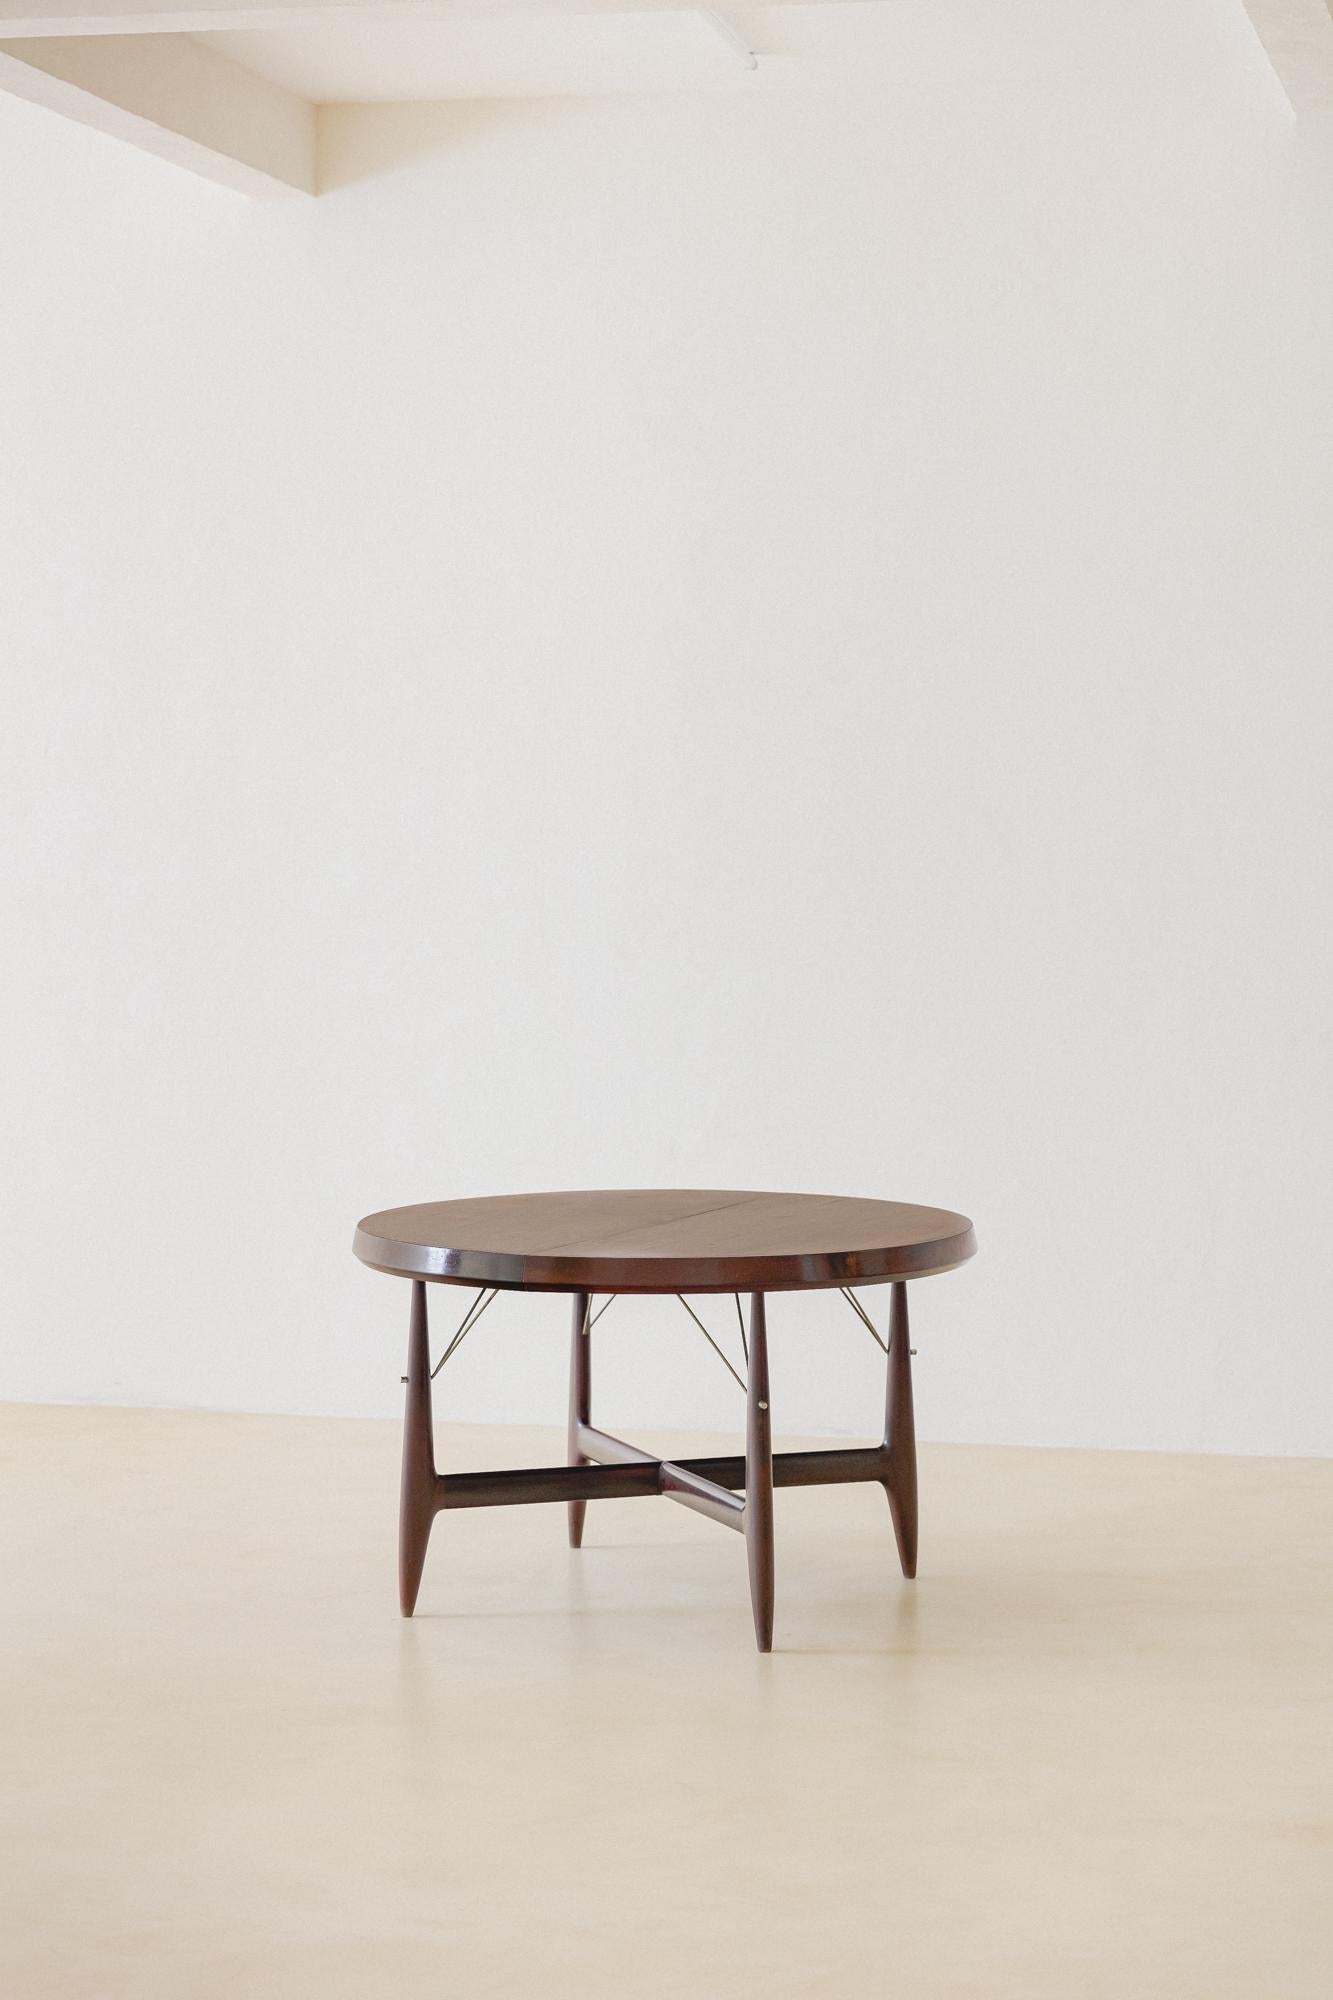 This expandable table is an example of the inventive designs by Sergio Rodrigues (1927-2014). The four-seat table made of solid Rosewood with a veneered top is extendable for six seats, with a practical engine at the table's center. 

This piece